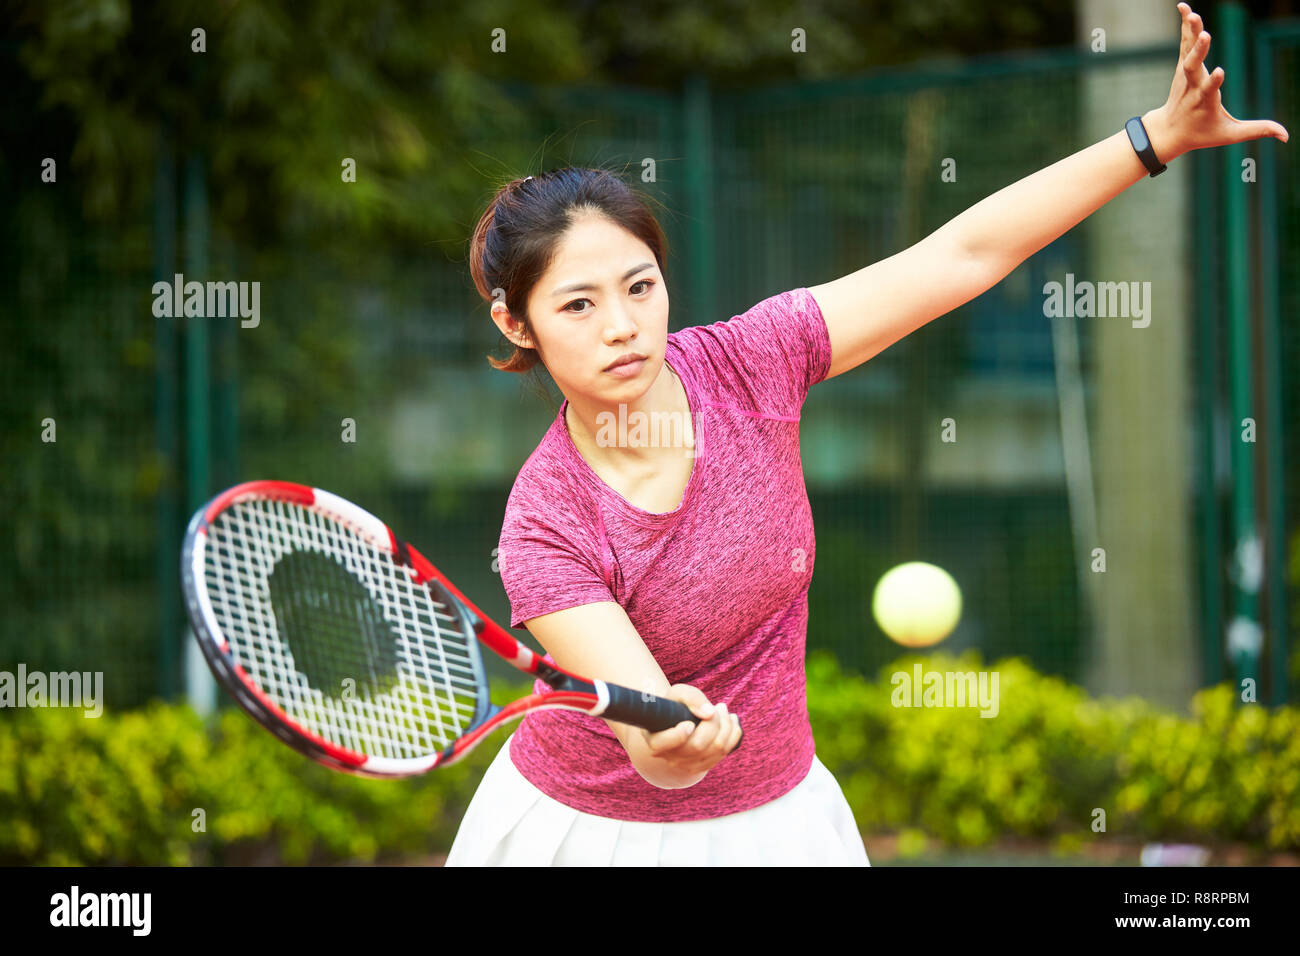 Young Asian woman playing tennis outdoors Banque D'Images